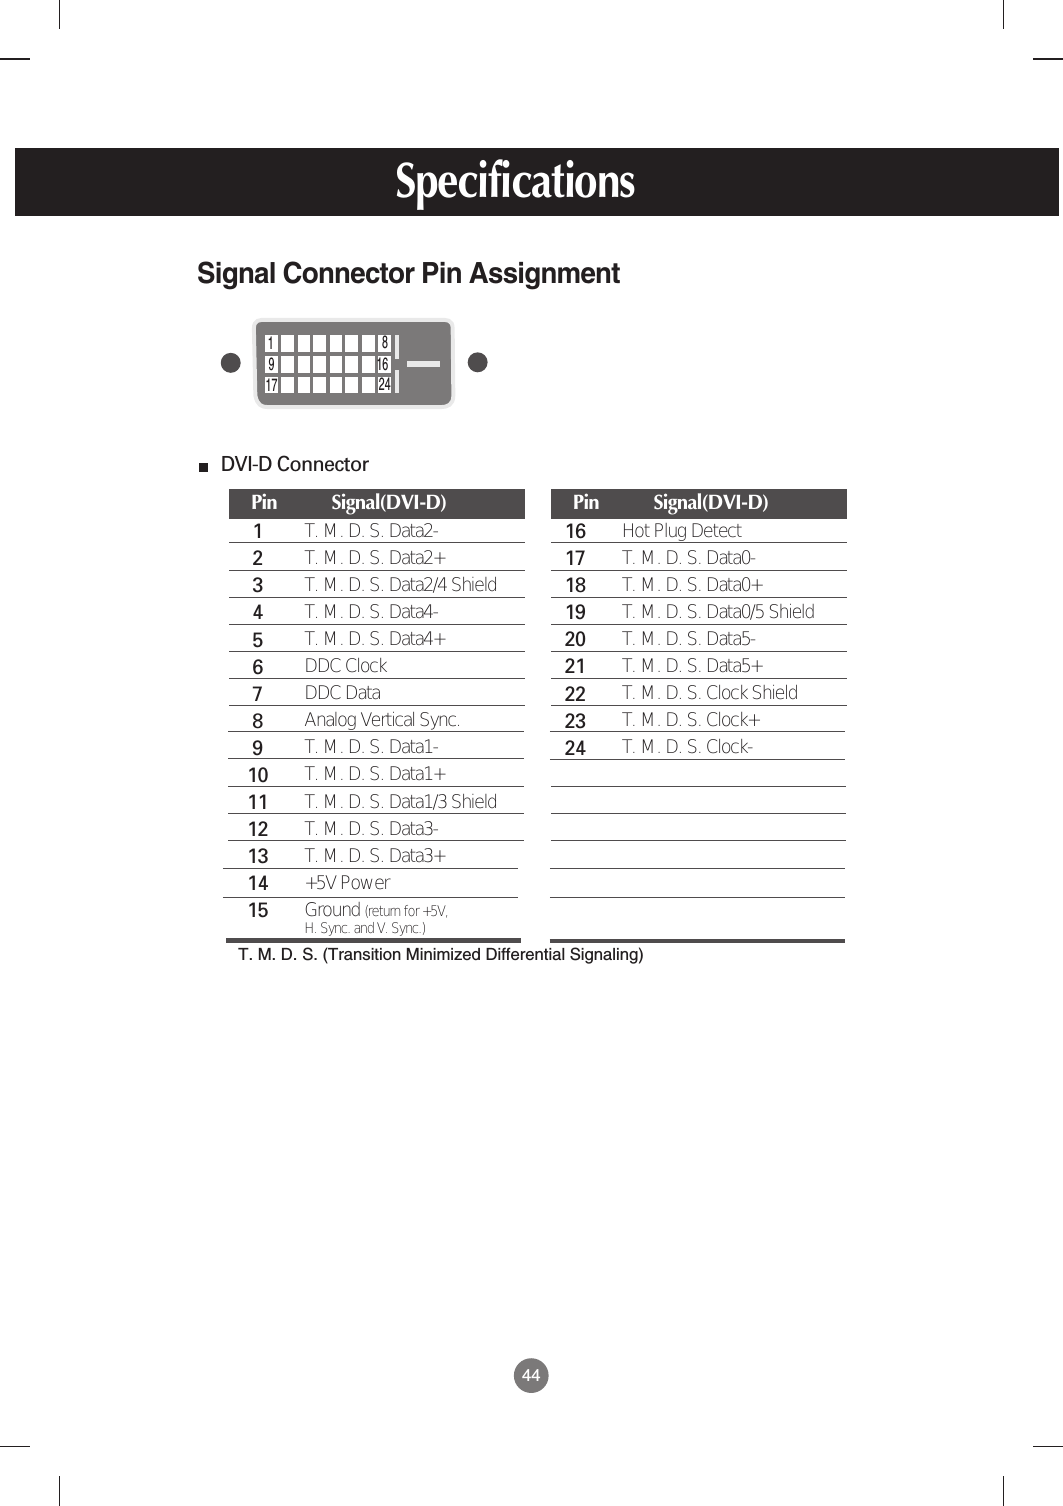 44SpecificationsSignal Connector Pin Assignment18917 2416Pin           Signal(DVI-D)123456789101112131415T. M. D. S. Data2-T. M. D. S. Data2+T. M. D. S. Data2/4 ShieldT. M. D. S. Data4-T. M. D. S. Data4+DDC ClockDDC DataAnalog Vertical Sync.T. M. D. S. Data1-T. M. D. S. Data1+T. M. D. S. Data1/3 ShieldT. M. D. S. Data3-T. M. D. S. Data3++5V PowerGround (return for +5V, H. Sync. and V. Sync.)Pin           Signal(DVI-D)161718192021222324Hot Plug DetectT. M. D. S. Data0-T. M. D. S. Data0+T. M. D. S. Data0/5 ShieldT. M. D. S. Data5-T. M. D. S. Data5+T. M. D. S. Clock ShieldT. M. D. S. Clock+T. M. D. S. Clock-T. M. D. S. (Transition Minimized Differential Signaling)DVI-D Connector 